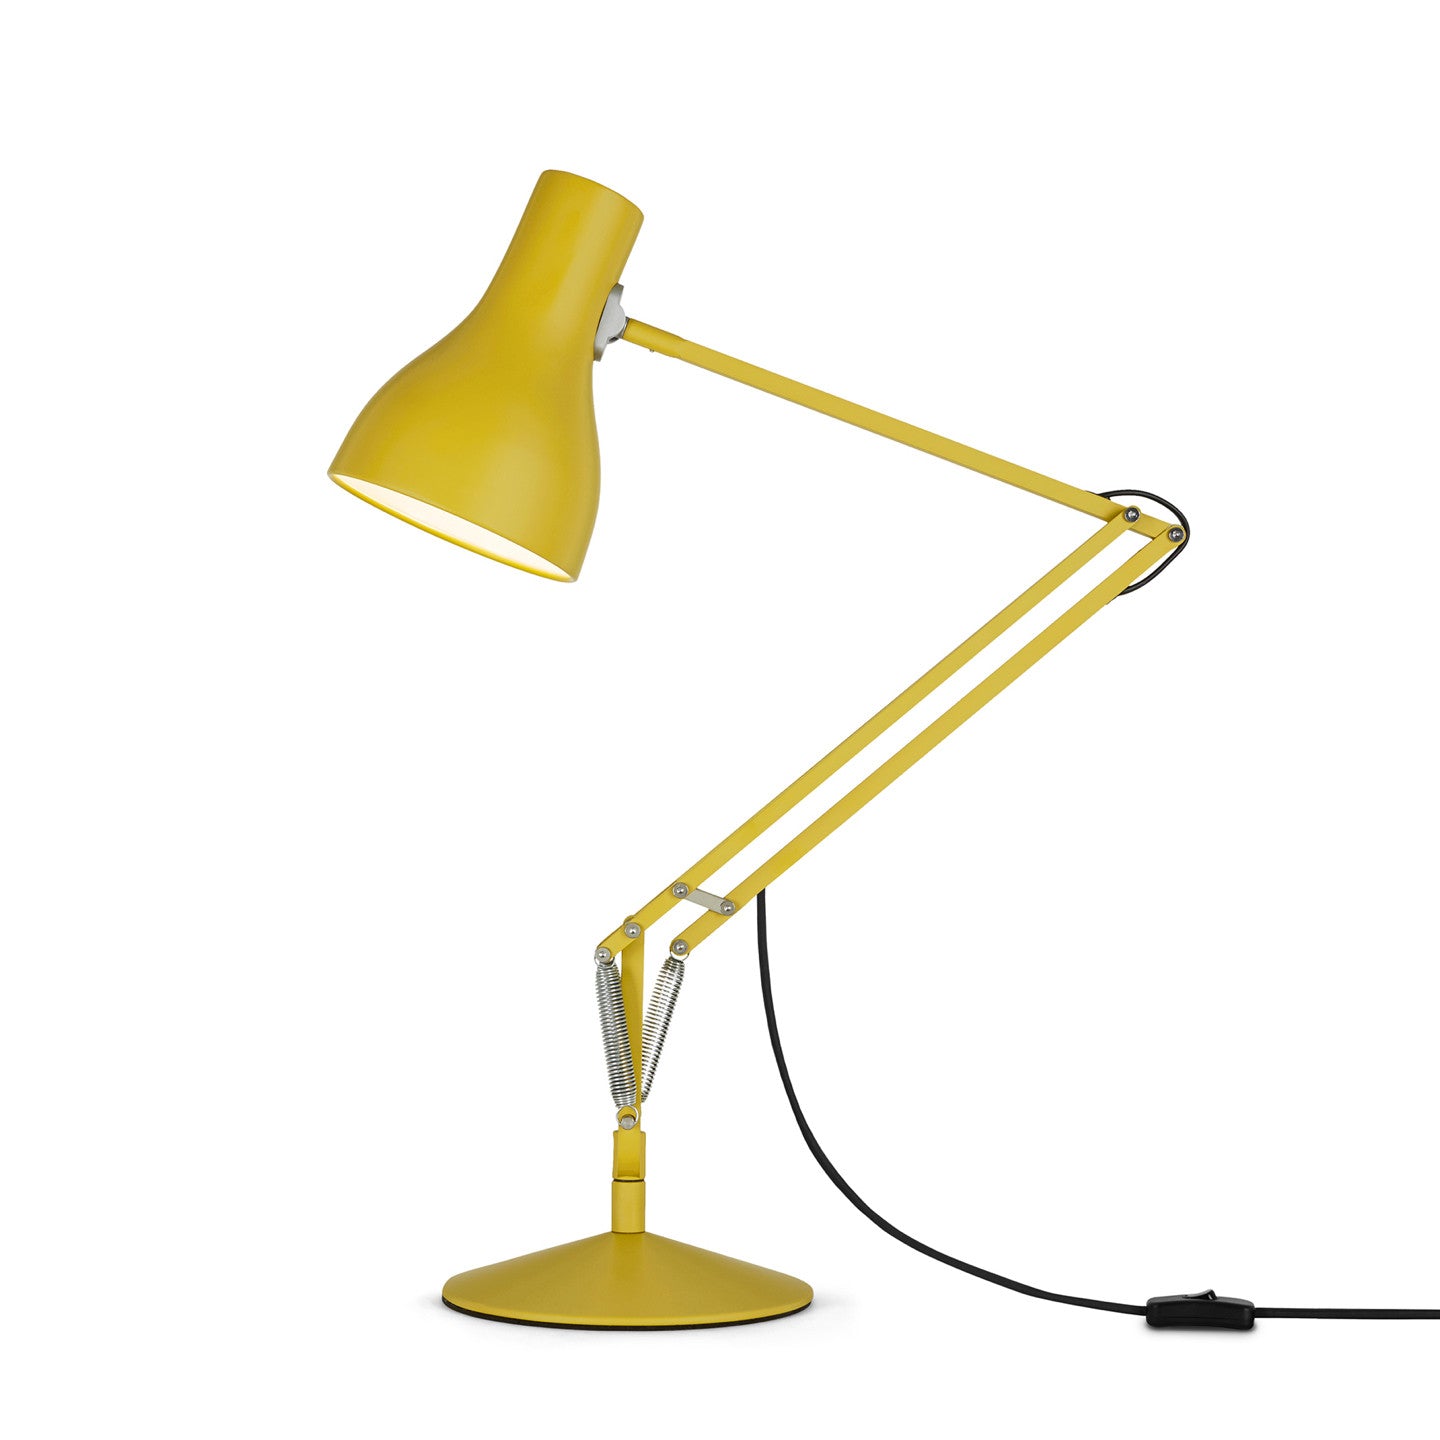 Type 75 Desk Lamp Yellow Ochre Edition by Margaret Howell for Anglepoise